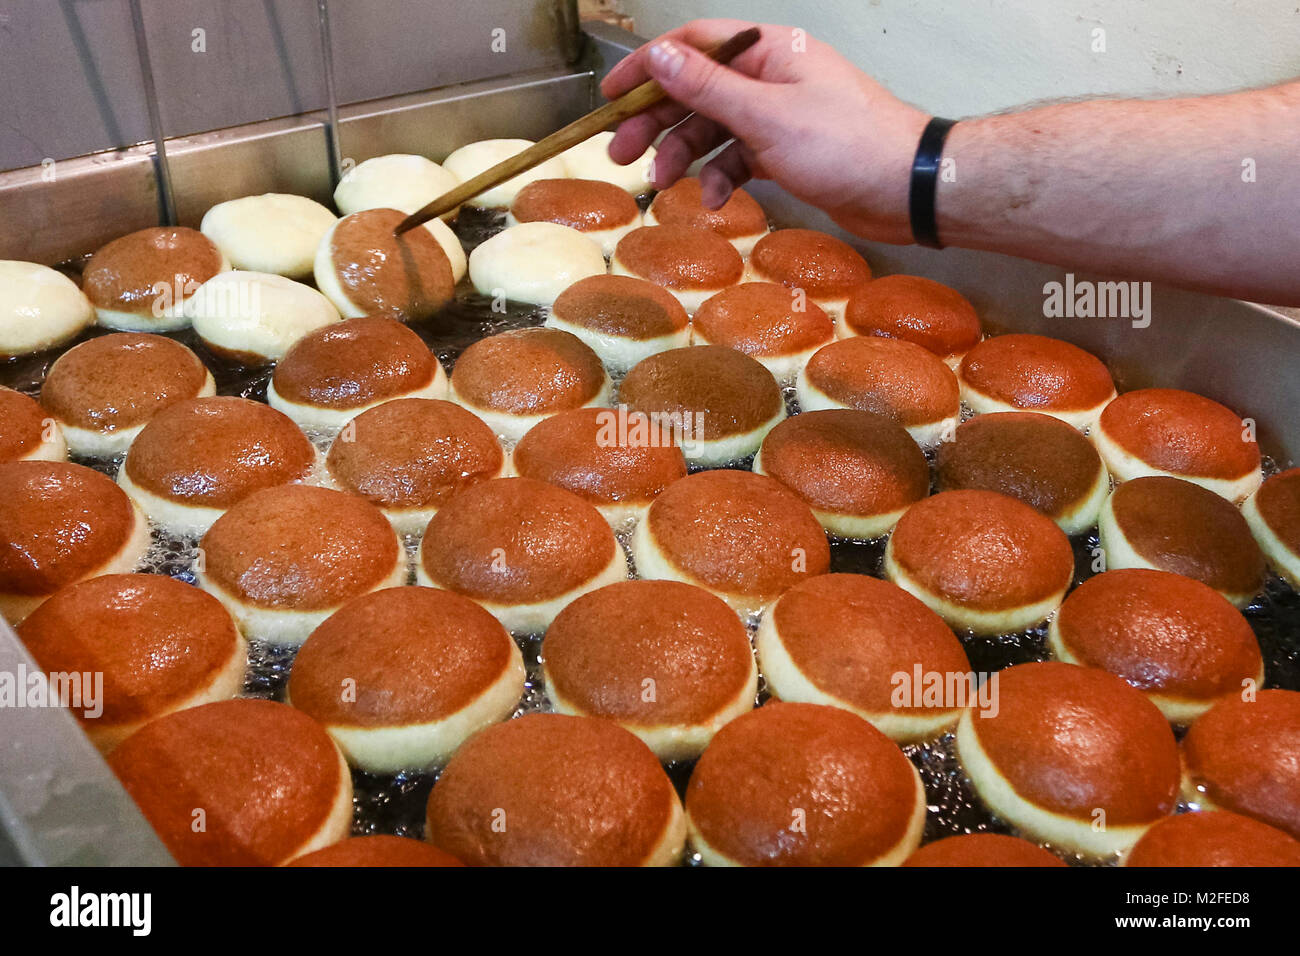 RESTRICTED FOR POLAND - 7 FEBRUARY 2018, KRAKOW, POLAND. A well-known bakery 'Cichowscy' produces donuts for Fat Thursday. Fat Thursday is a traditional Catholic Christian feast on the last Thursday before Lent. It symbolizes the celebration of Carnival. The most popular dish served on that day in Poland are 'paczki' - fist-sized donuts filled with marmalade. Credit: Beata Zawrzel/Alamy Live News Stock Photo